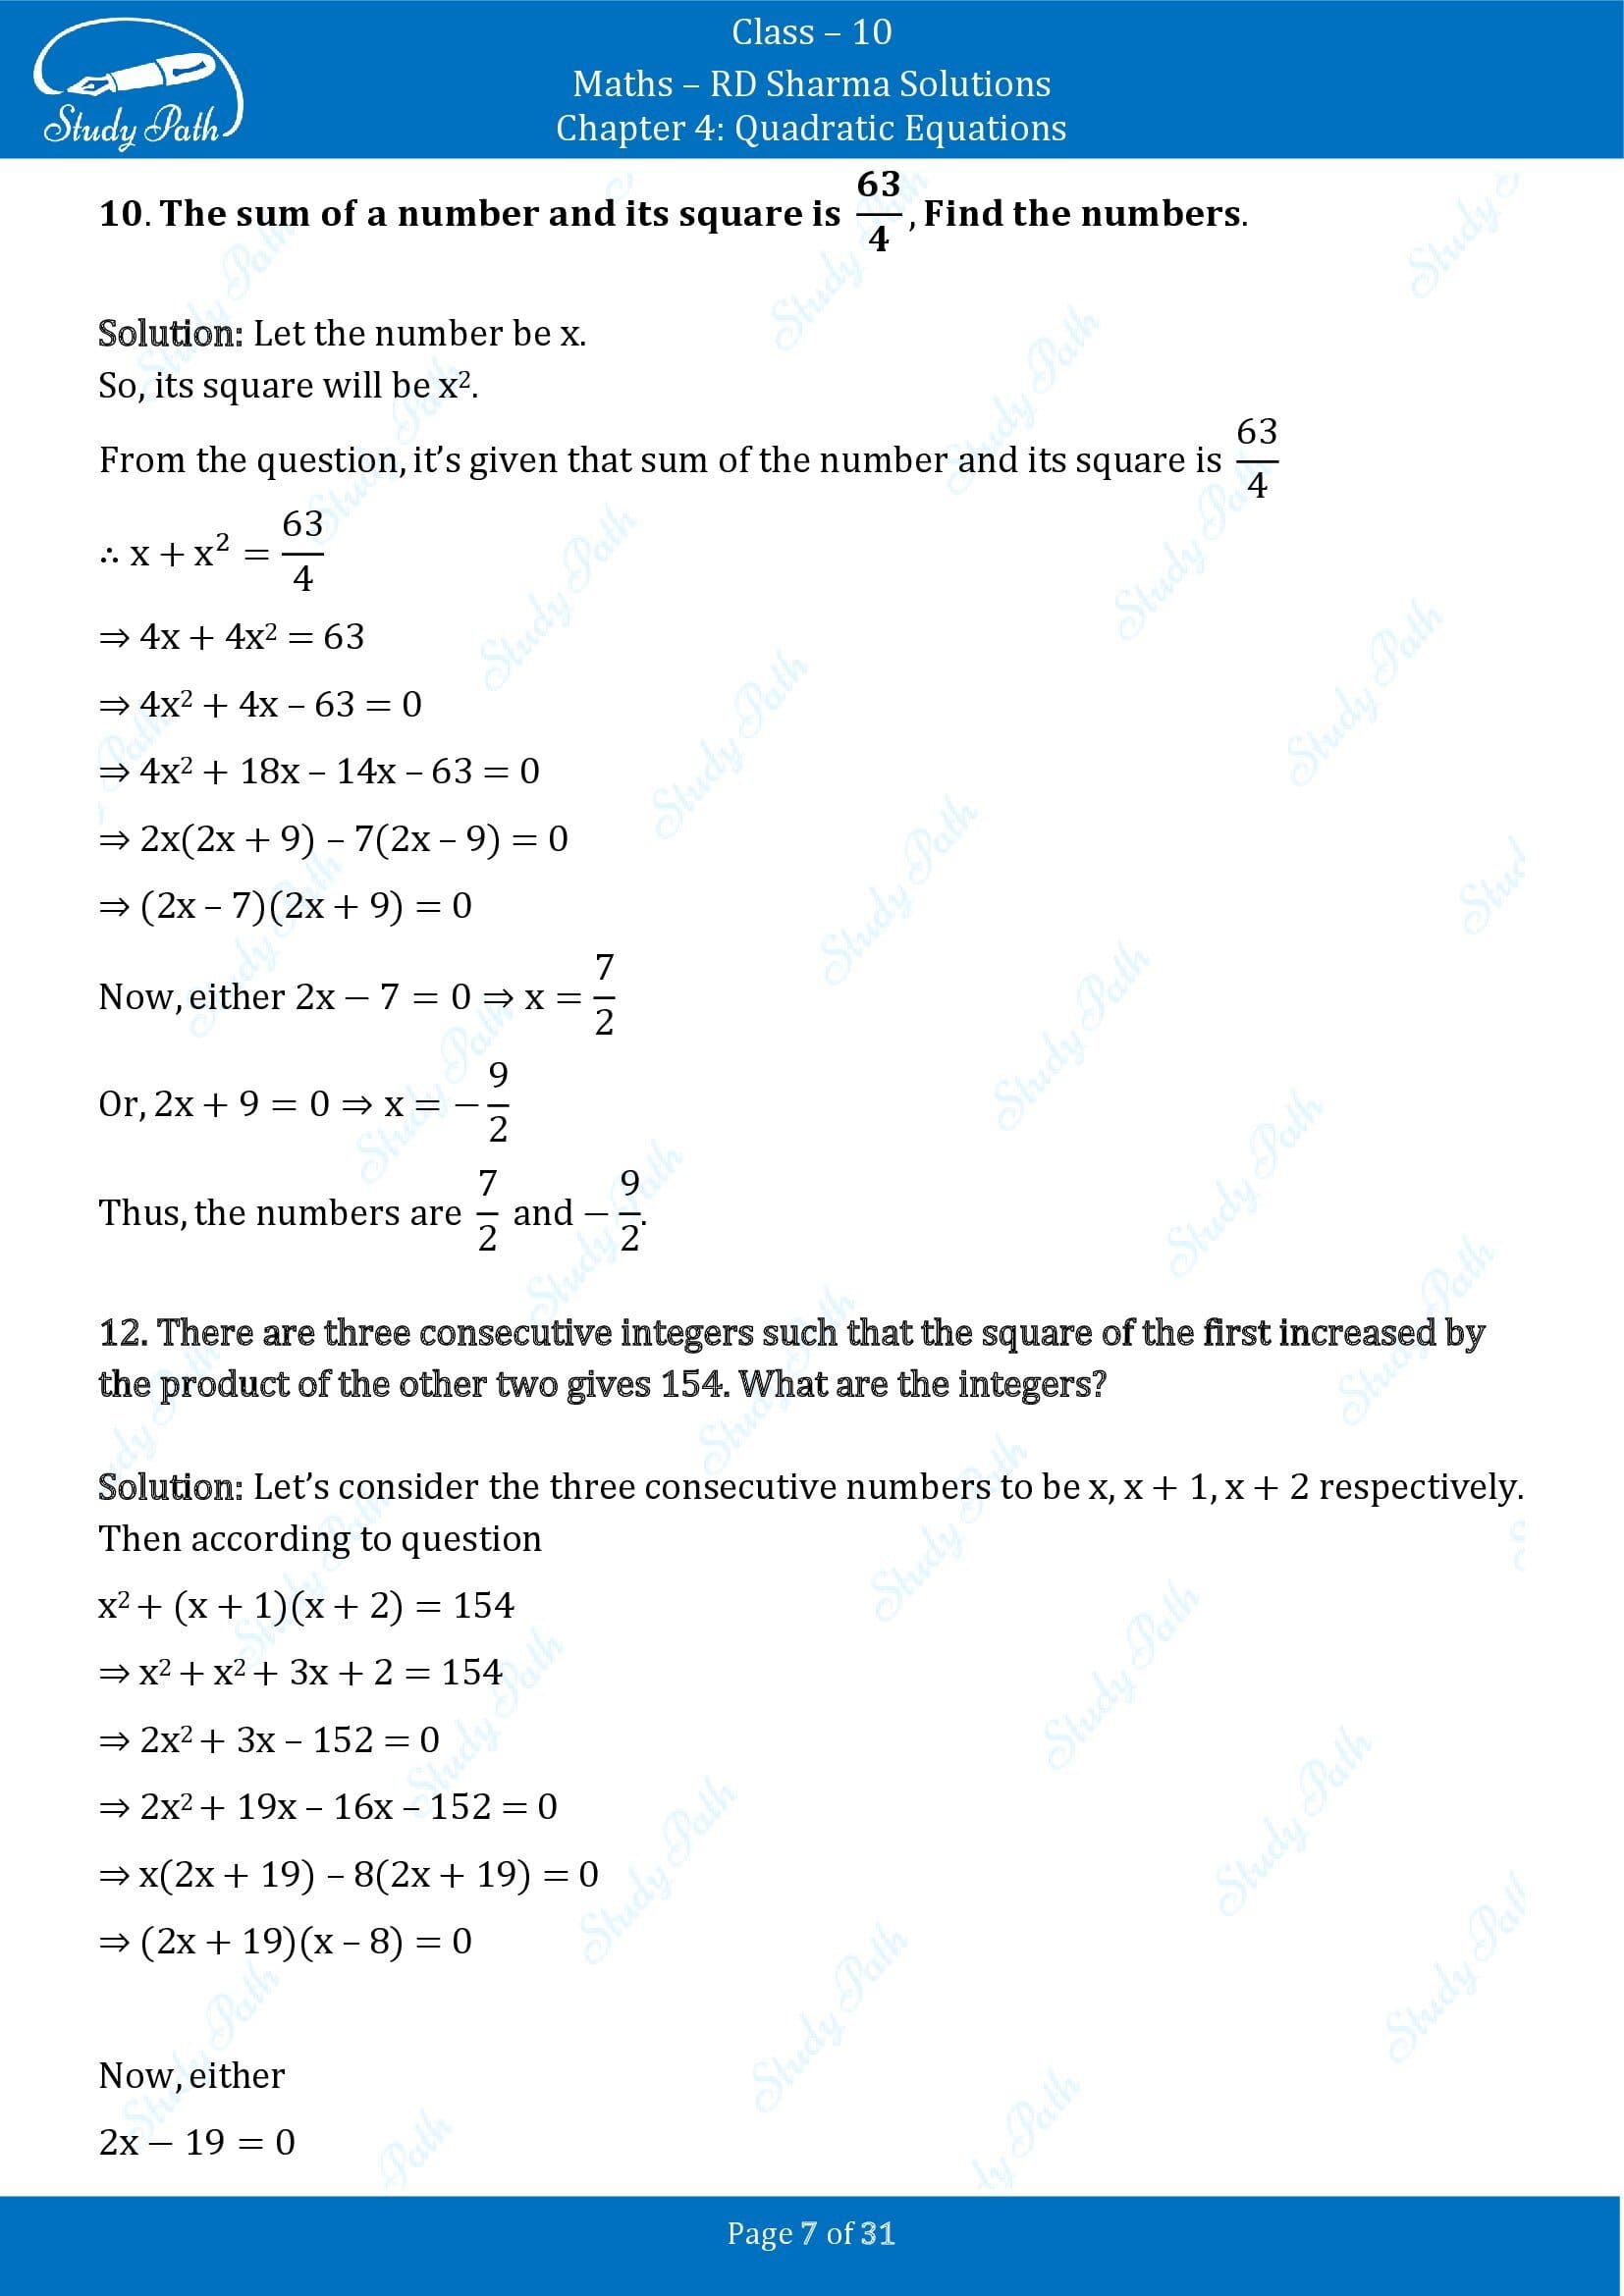 RD Sharma Solutions Class 10 Chapter 4 Quadratic Equations Exercise 4.7 00007